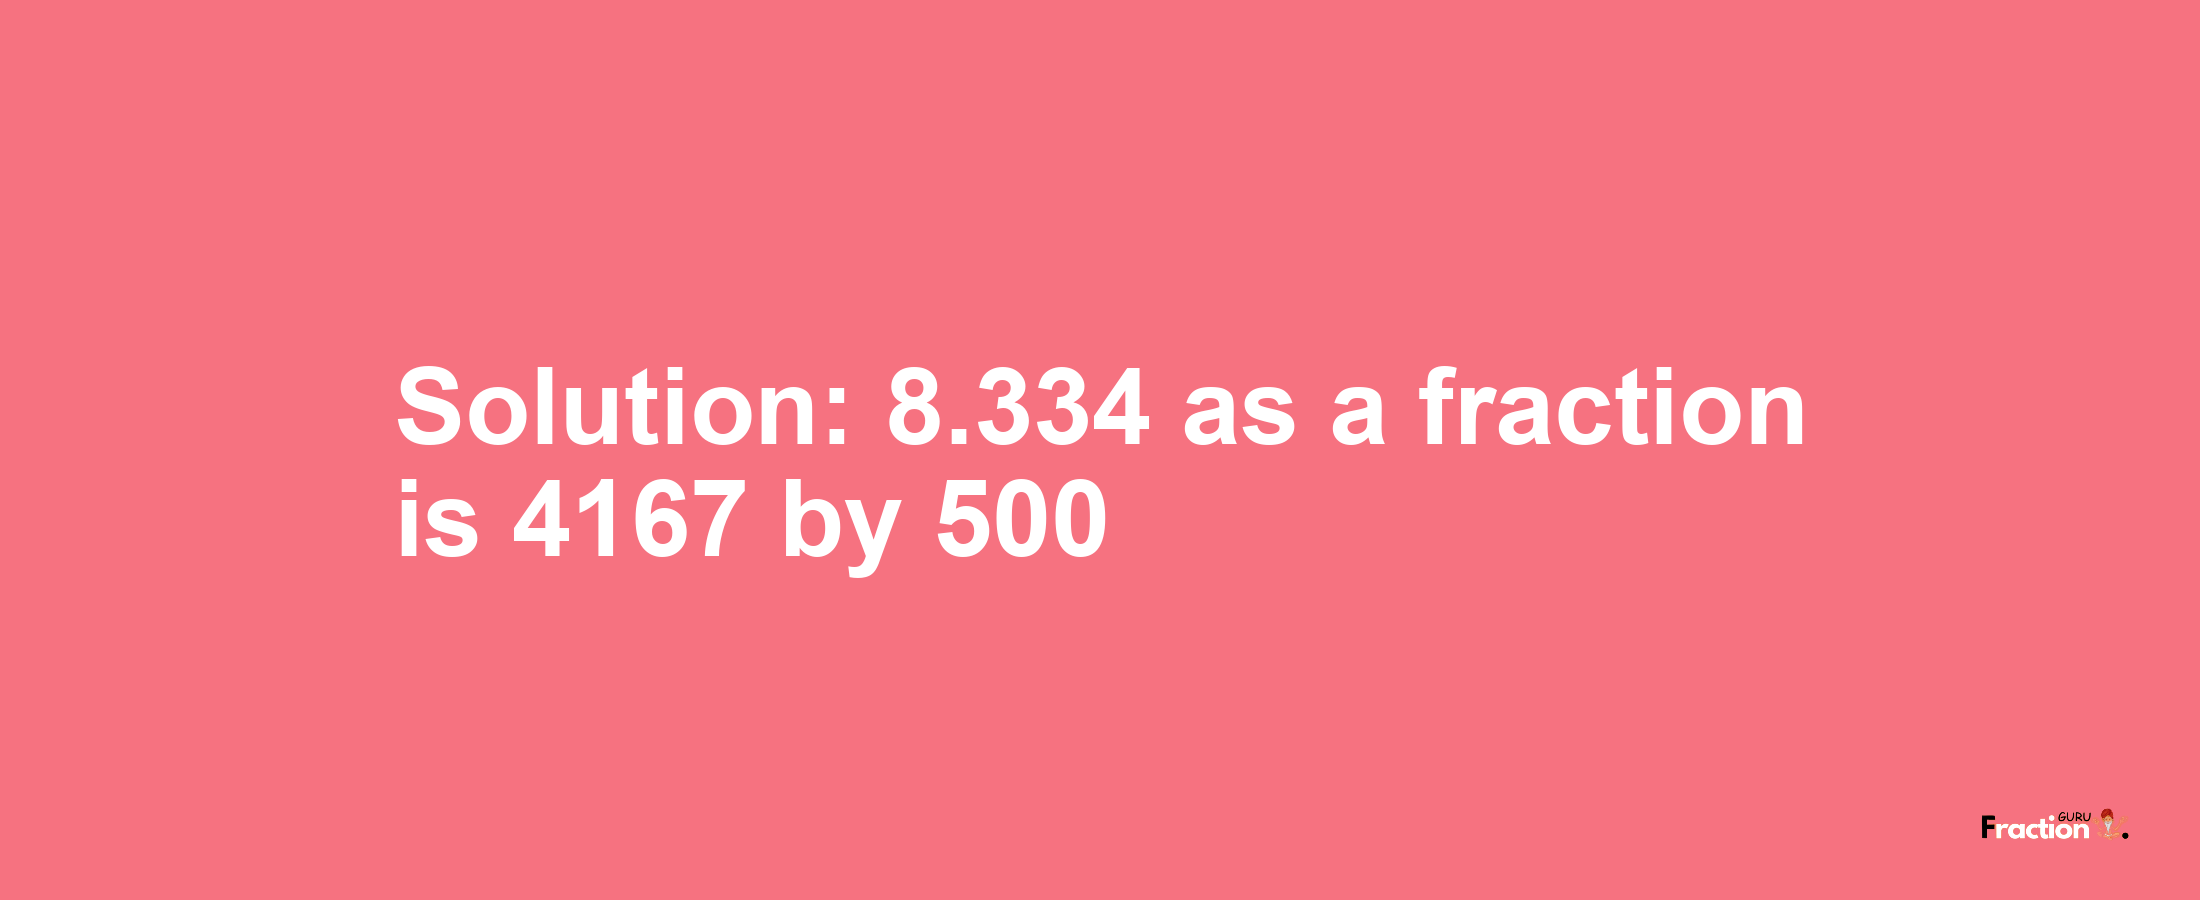 Solution:8.334 as a fraction is 4167/500